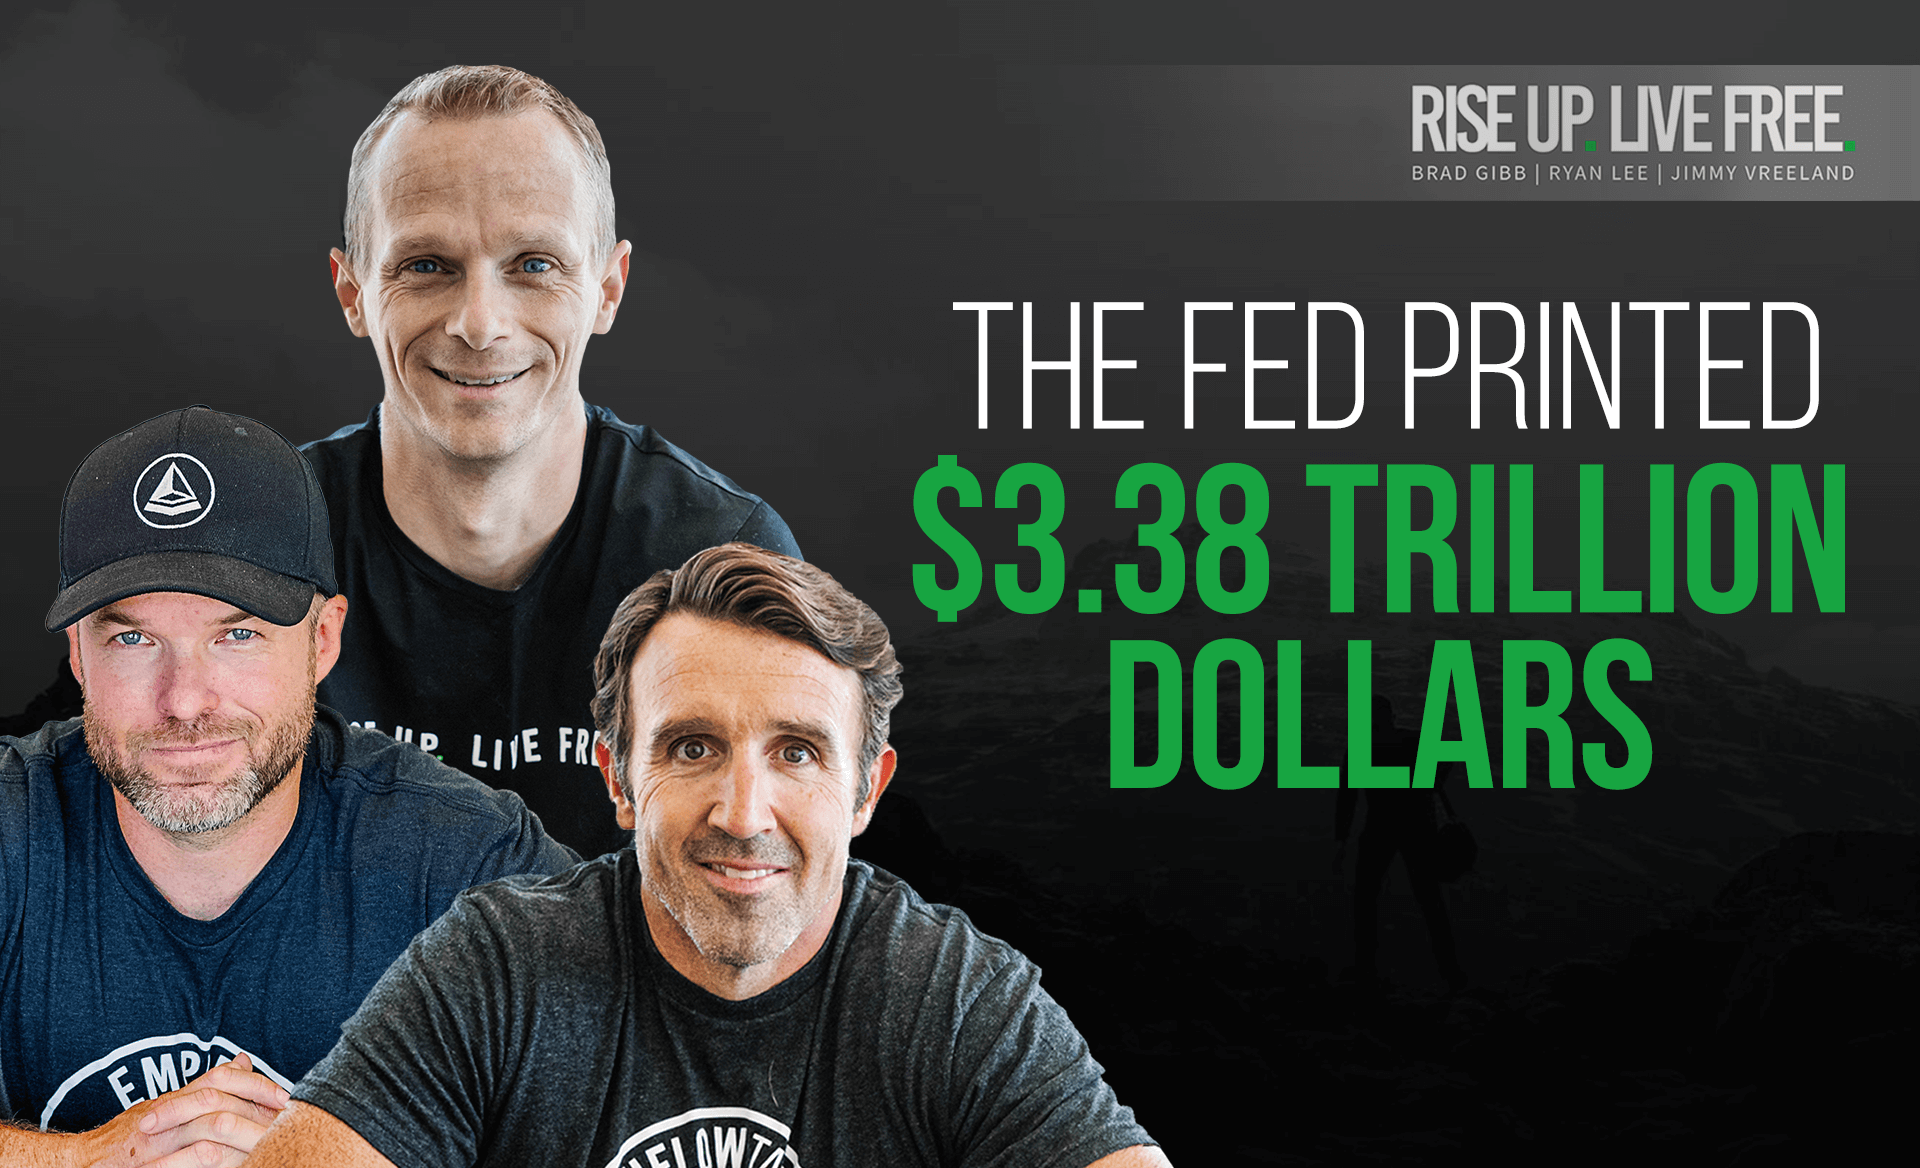 The Fed Printed $3.38 TRILLION Dollars...